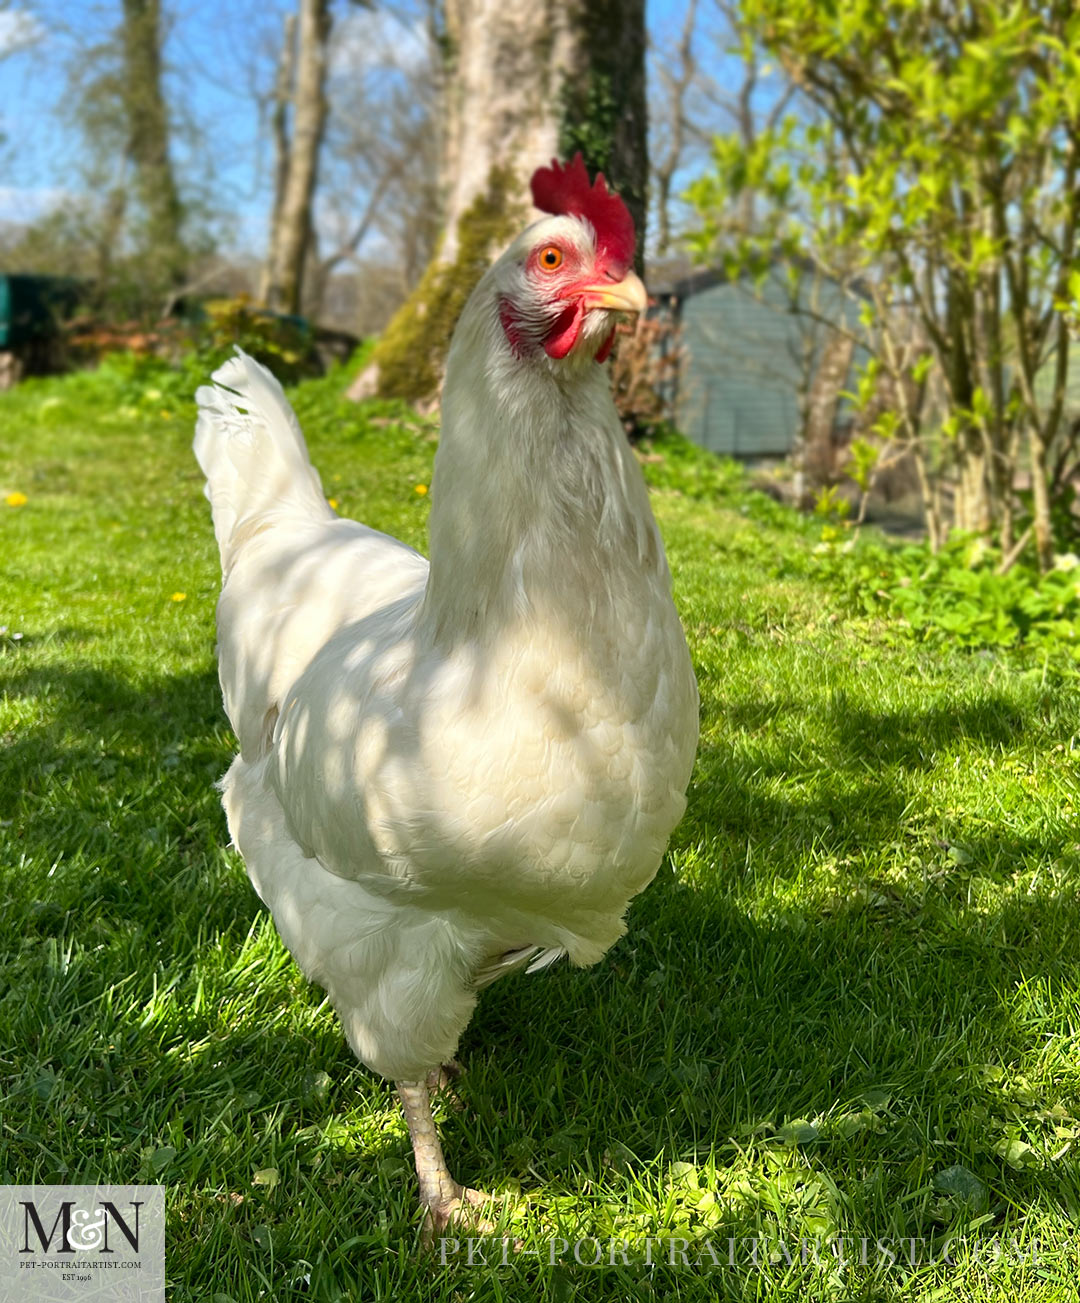 Melanie's April Monthly News - Chickens